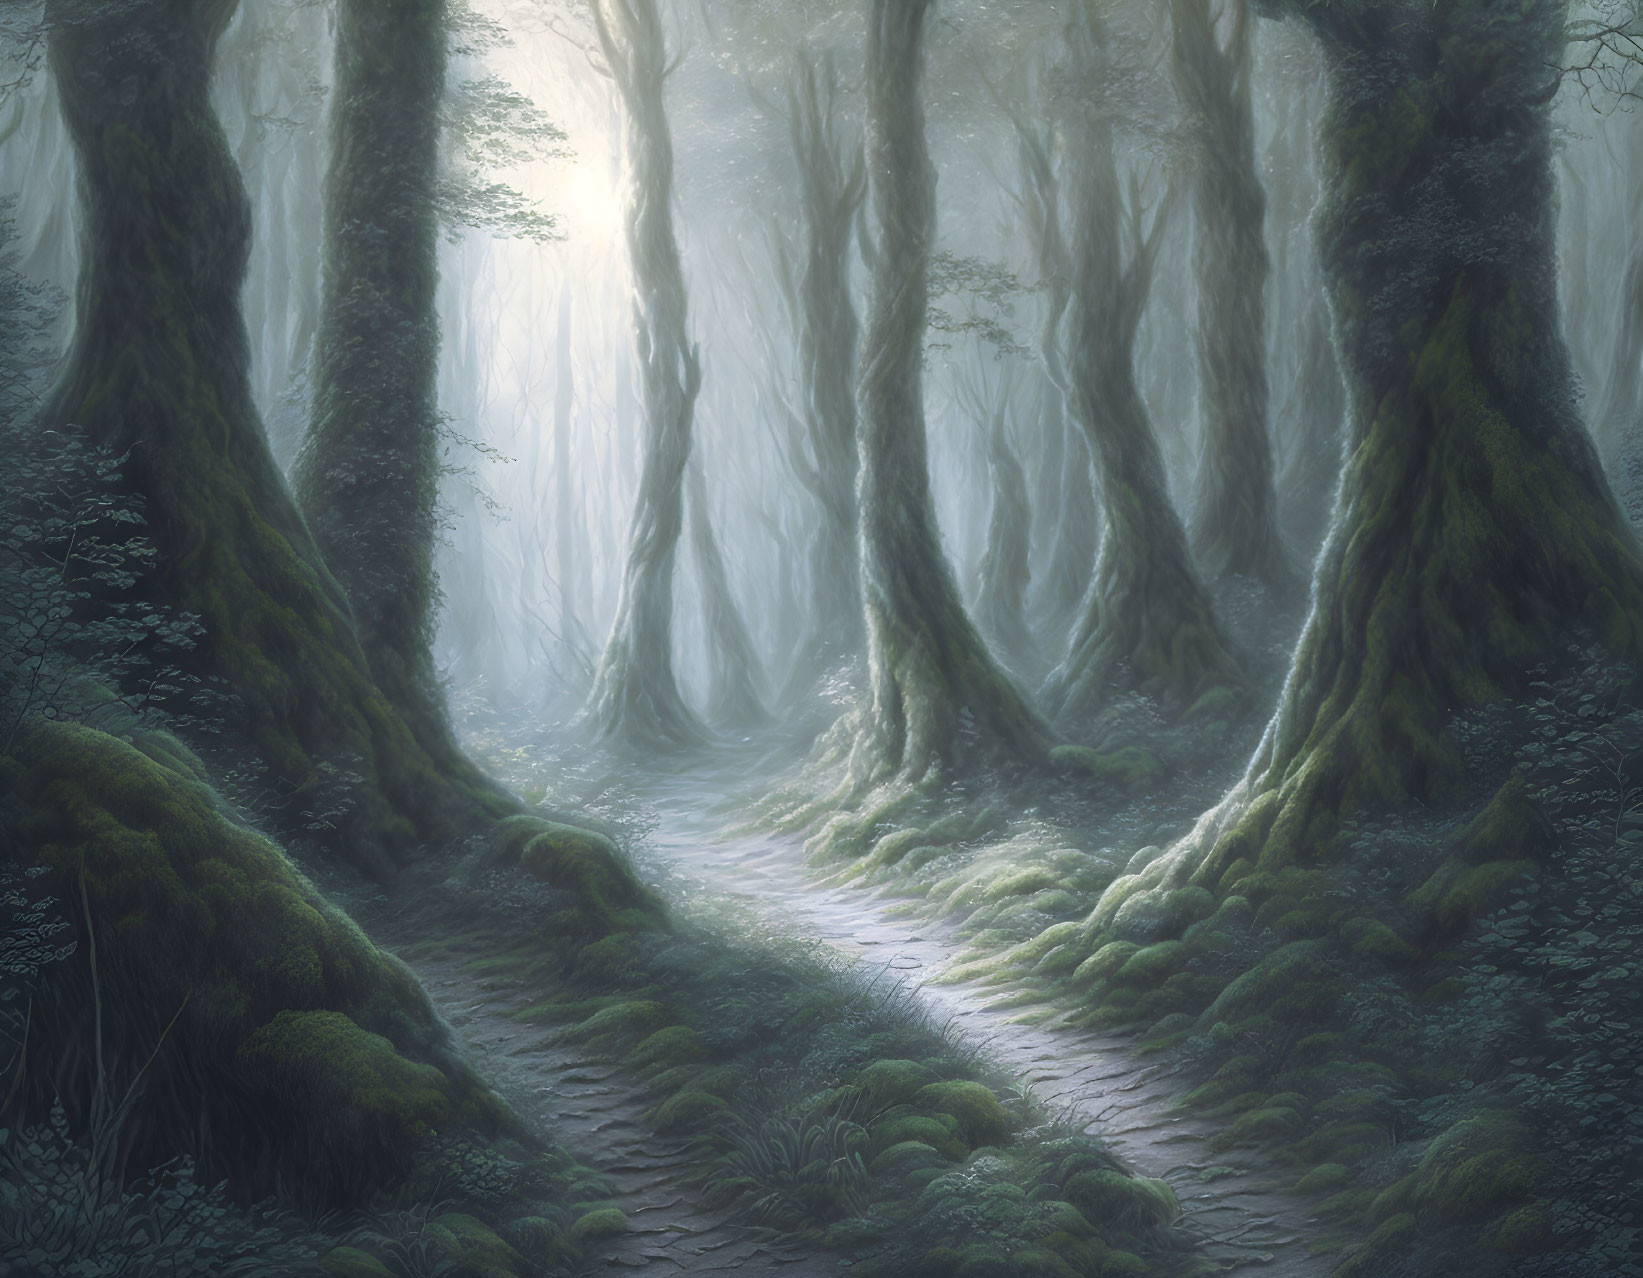 Enchanting forest path with fog-covered trees and sunlight